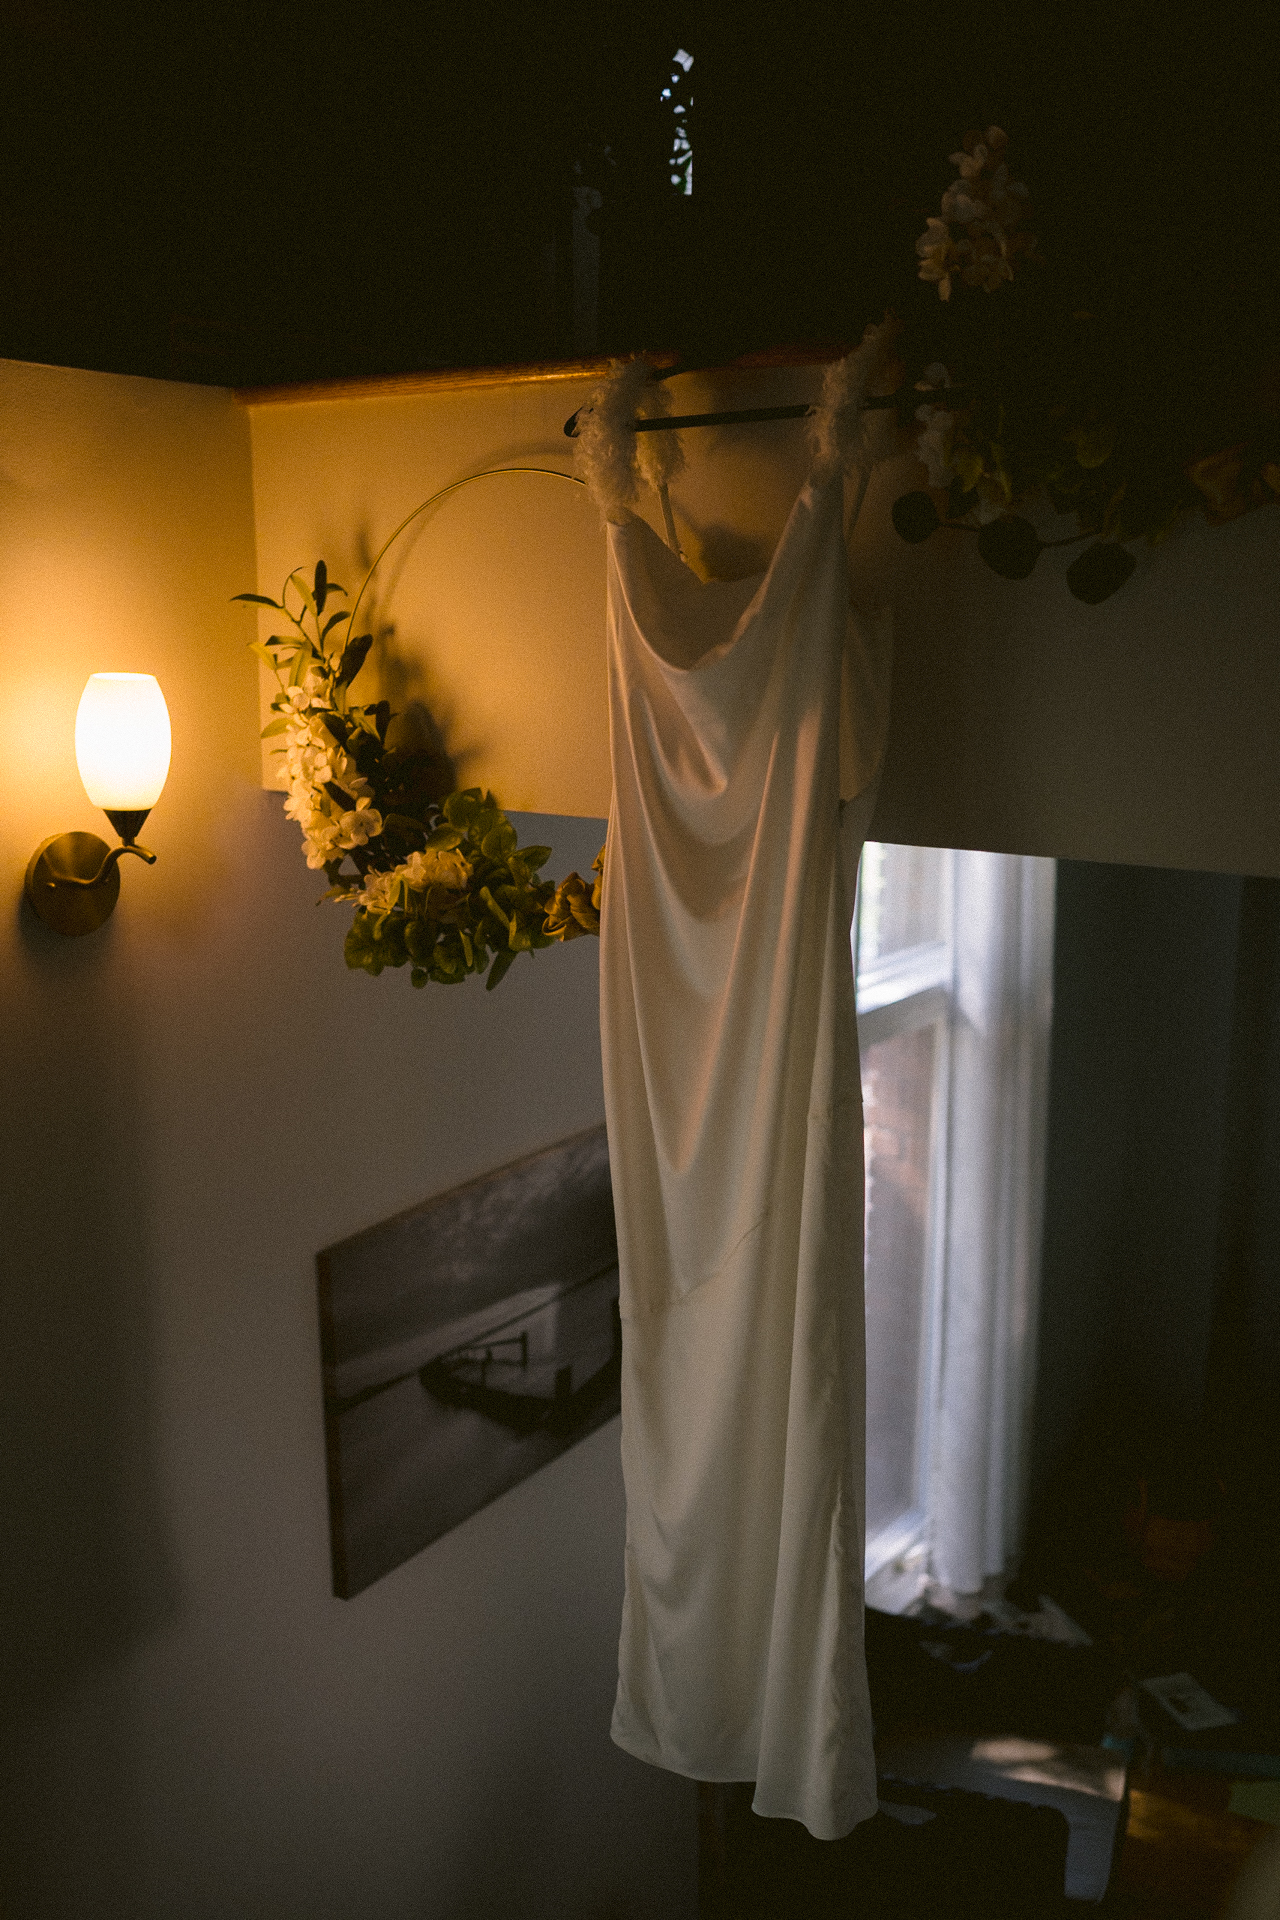 A wedding dress hanging, illuminated by warm light with a window in the background